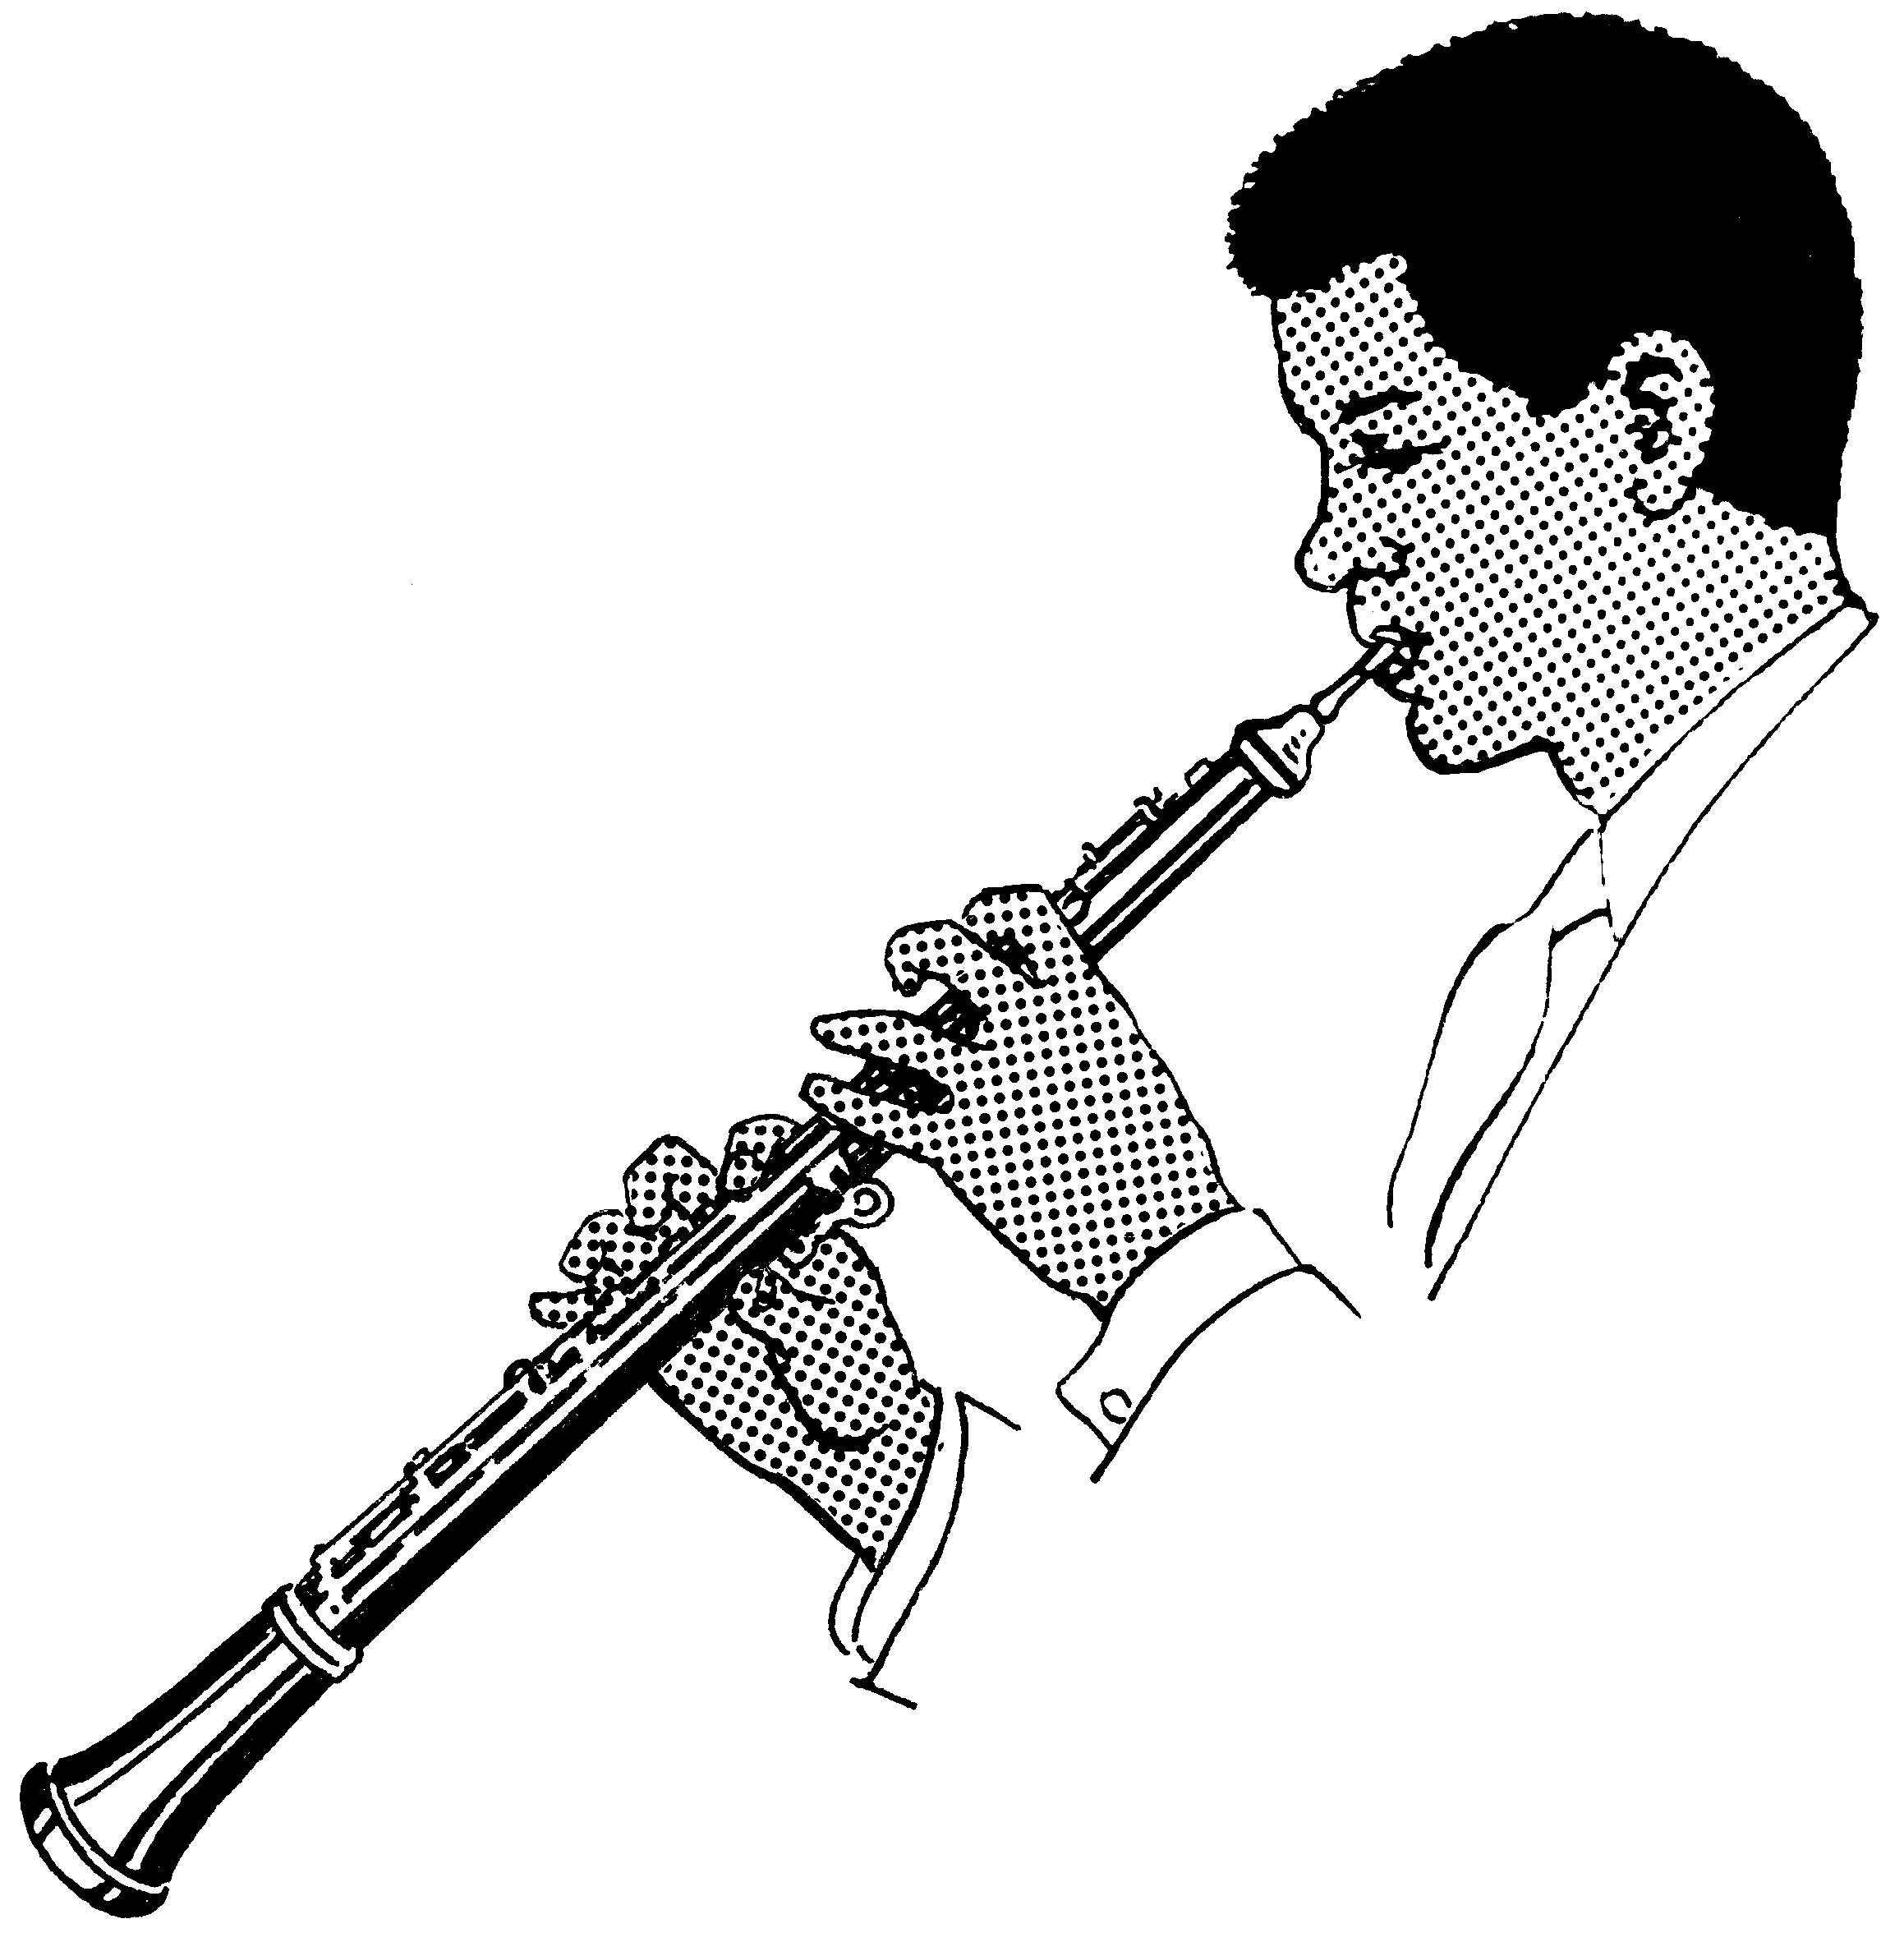 Oboe Clipart - Free Clipart Images